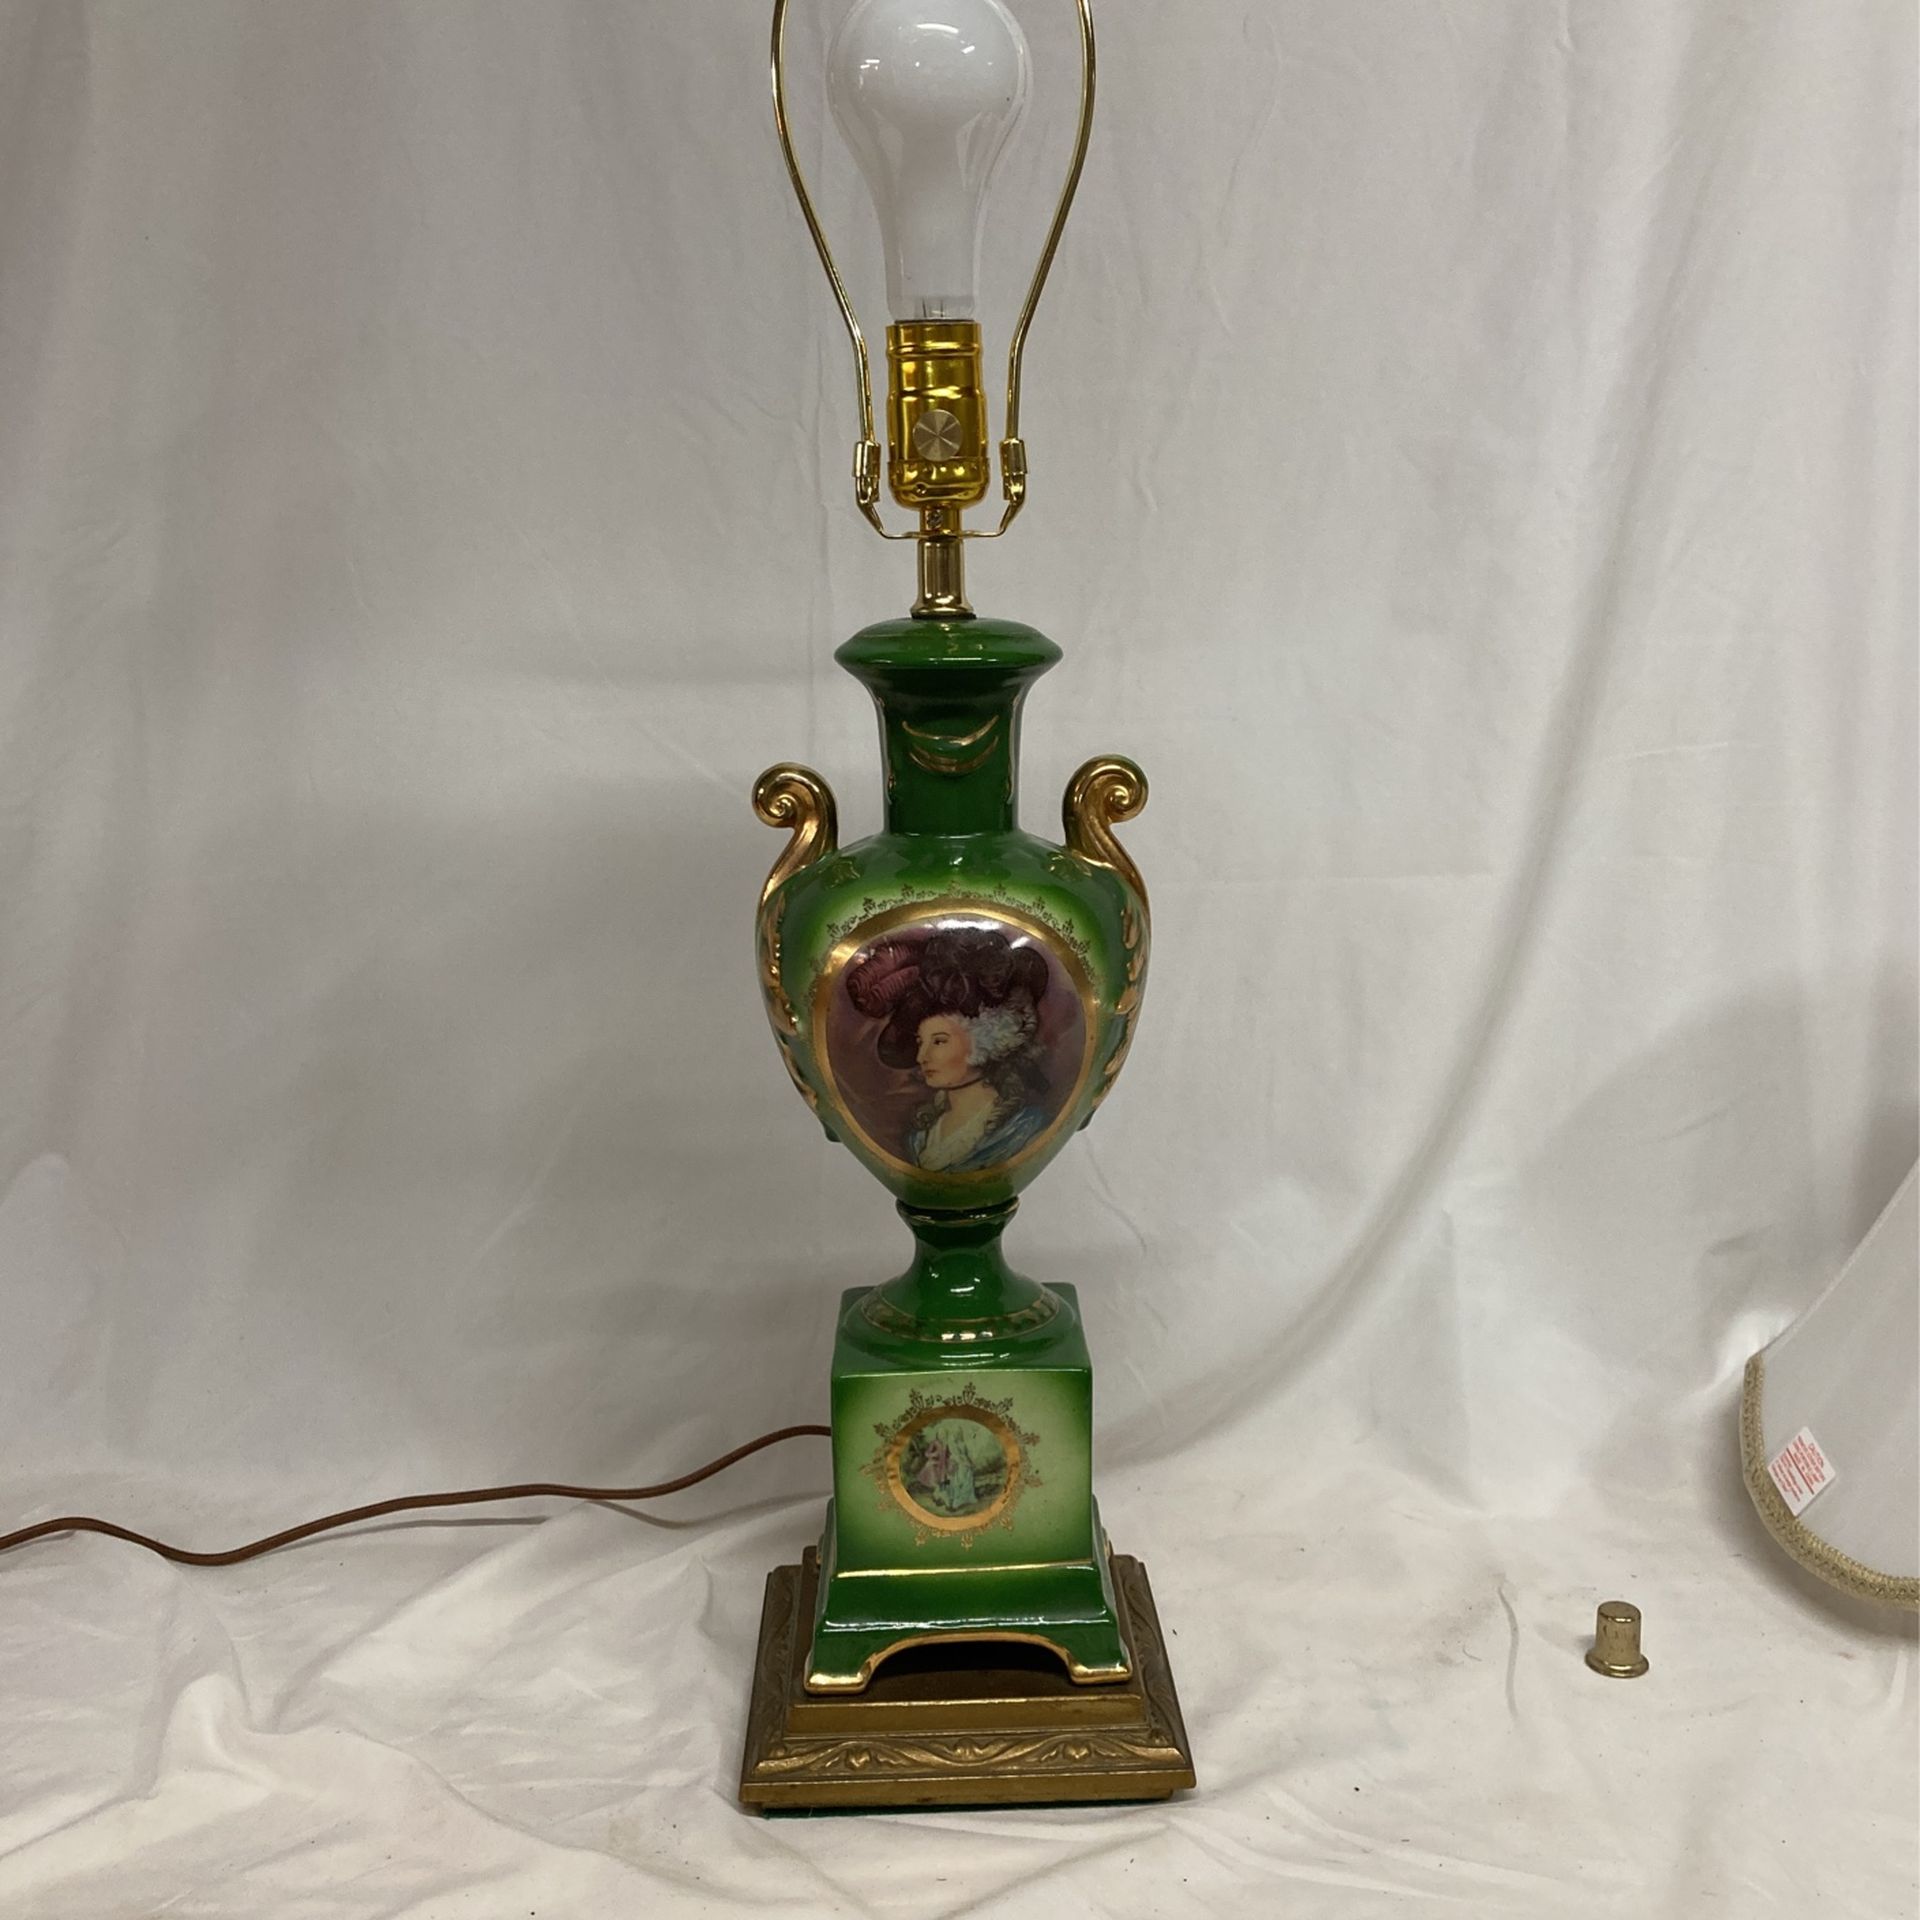 Very Old Lamp In Exlant Condition, 3 Way , 26 Inches Tall. $98. 00